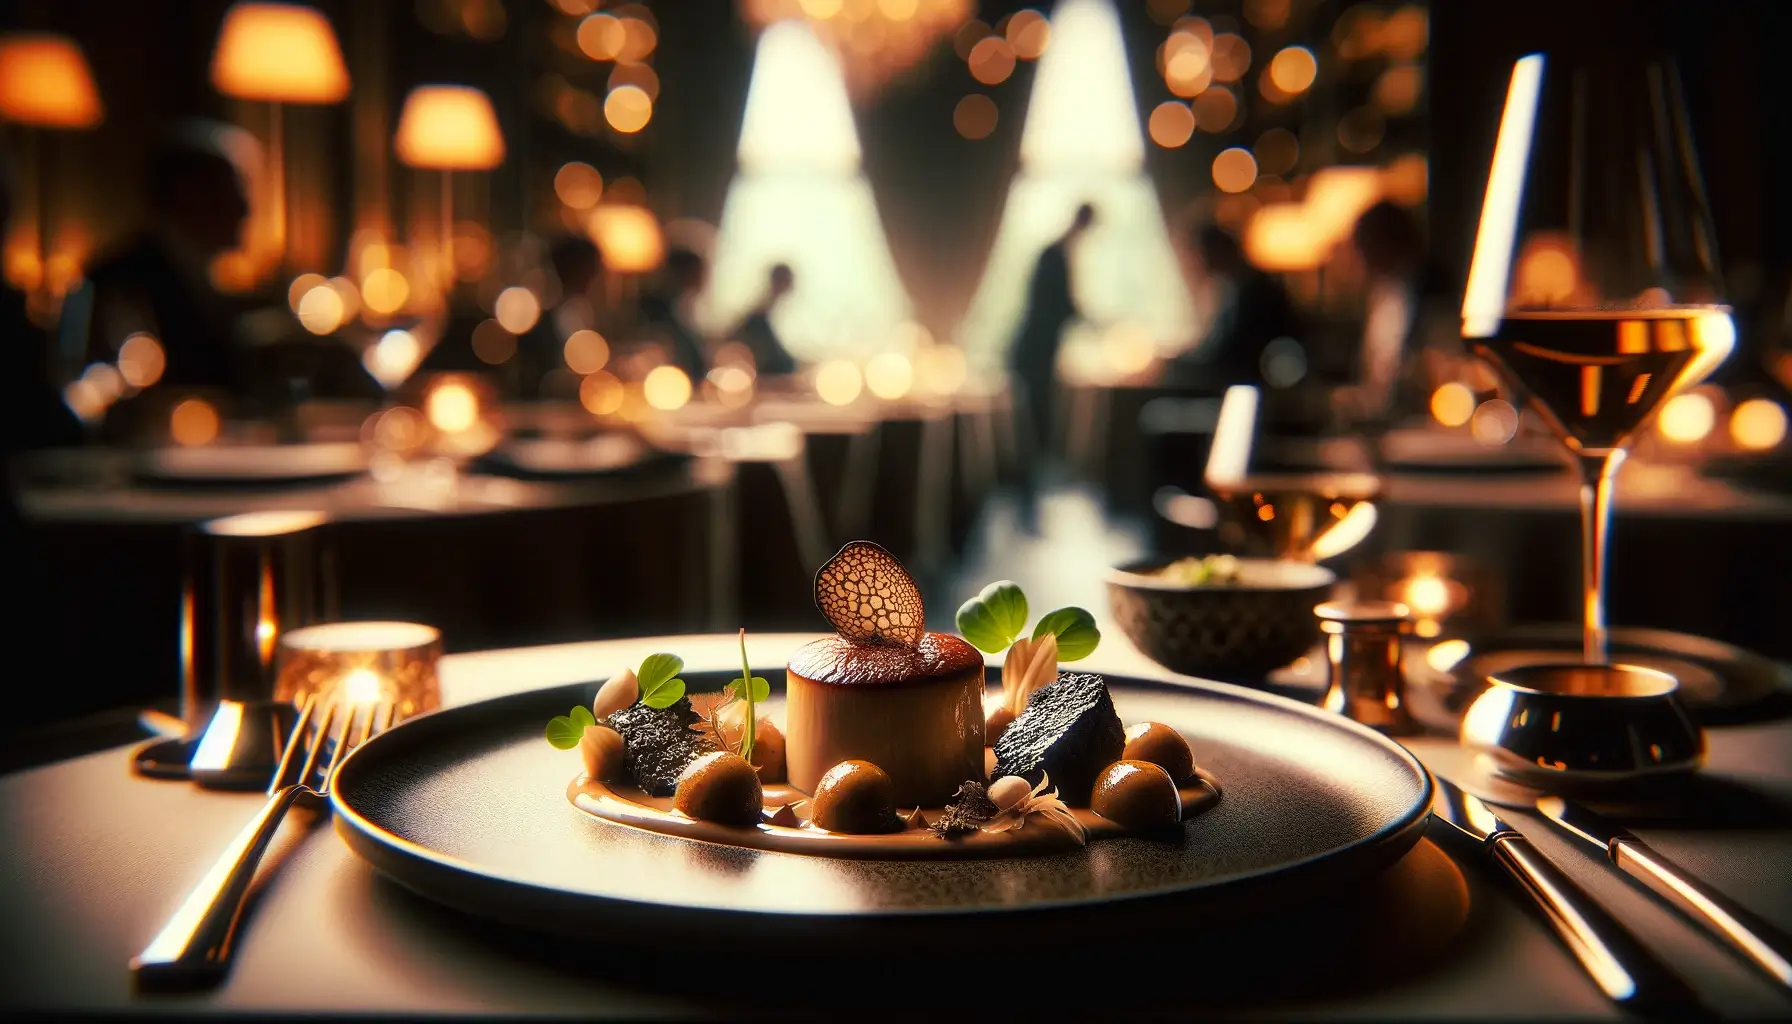 Gourmet dining experience with an exquisitely plated dessert surrounded by elegant tableware, highlighted by ambient lighting and a backdrop of a sophisticated restaurant setting.